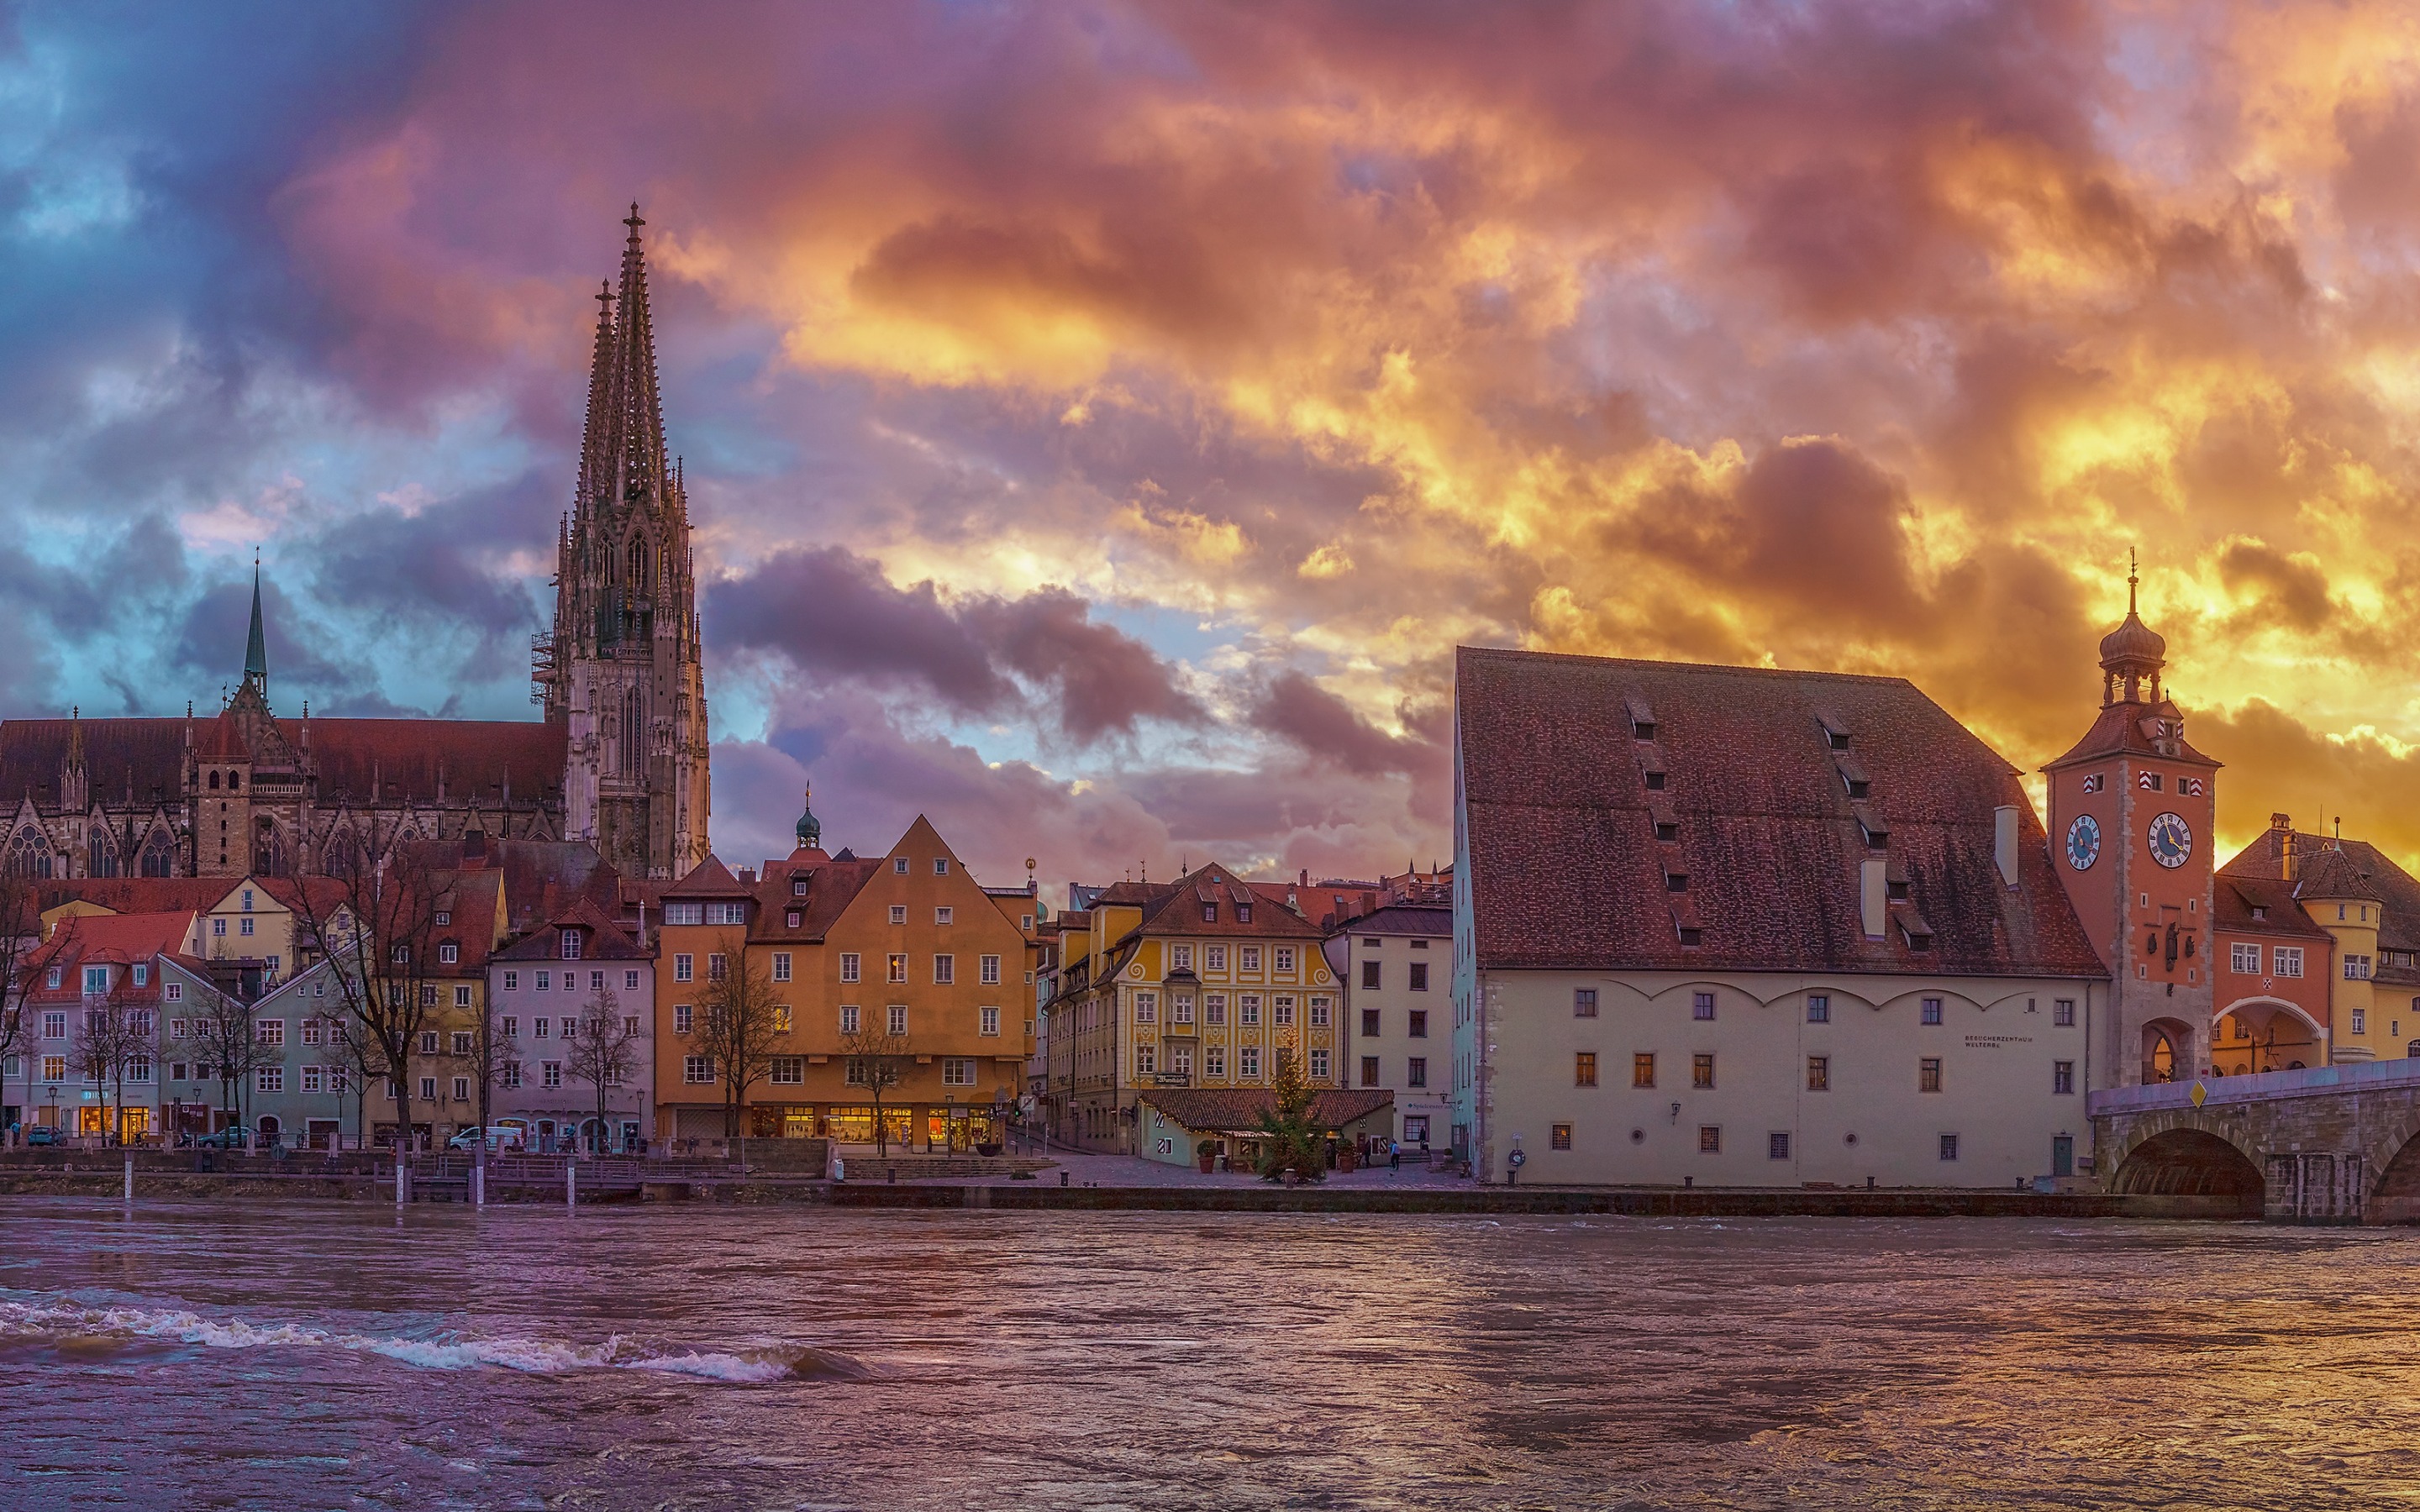 Download wallpaper Regensburg Cathedral, evening, sunset, cityscape